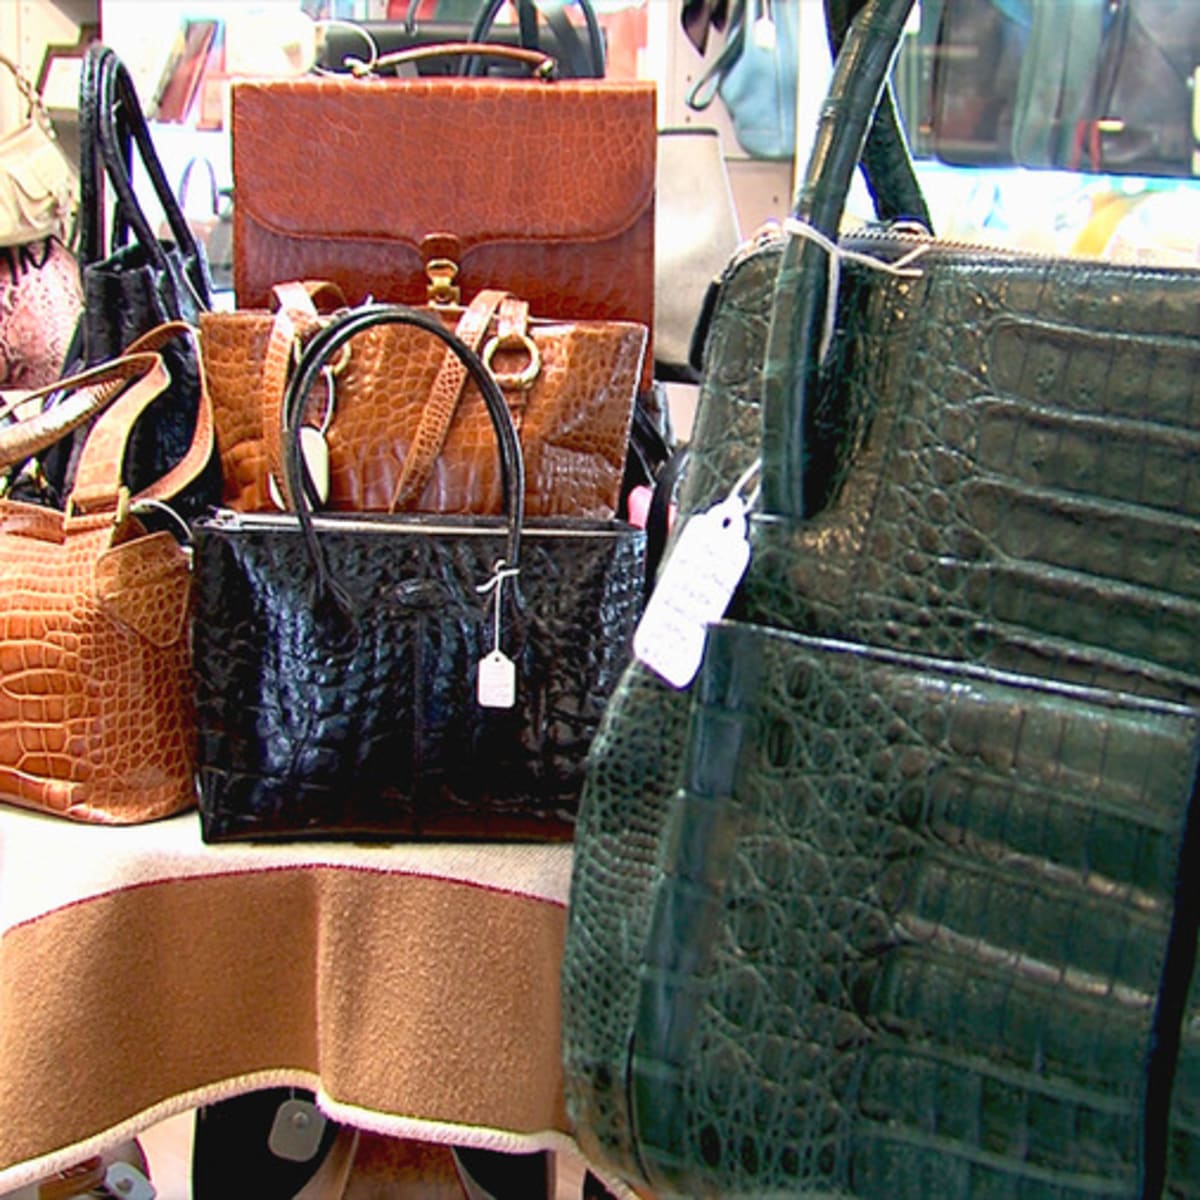 Get Your Bag: The Handbags with the Highest Resale Values